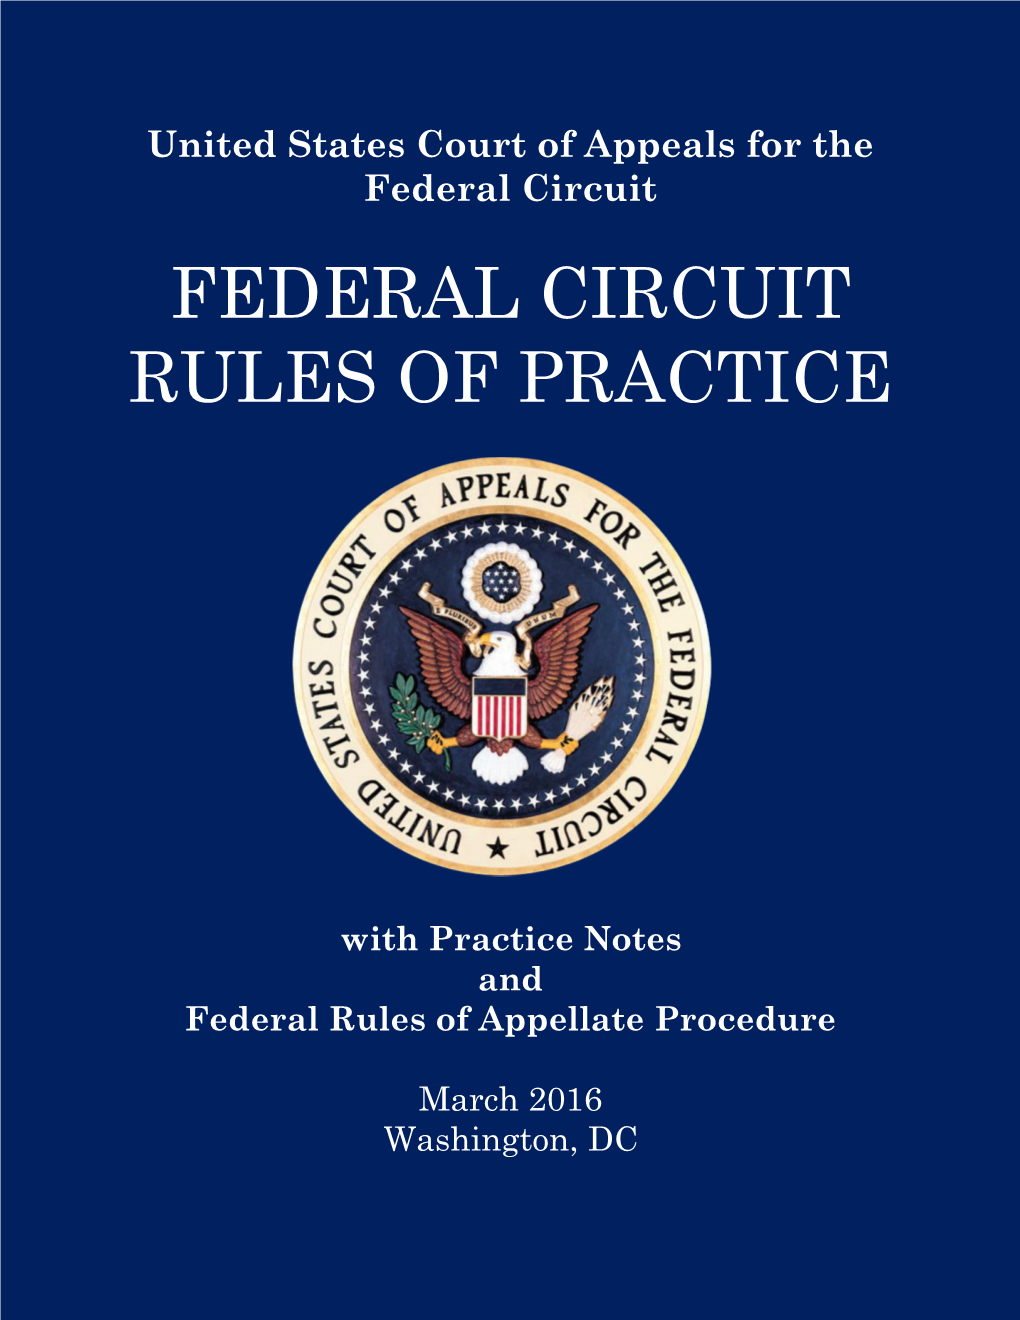 Federal Circuit Rules of Practice